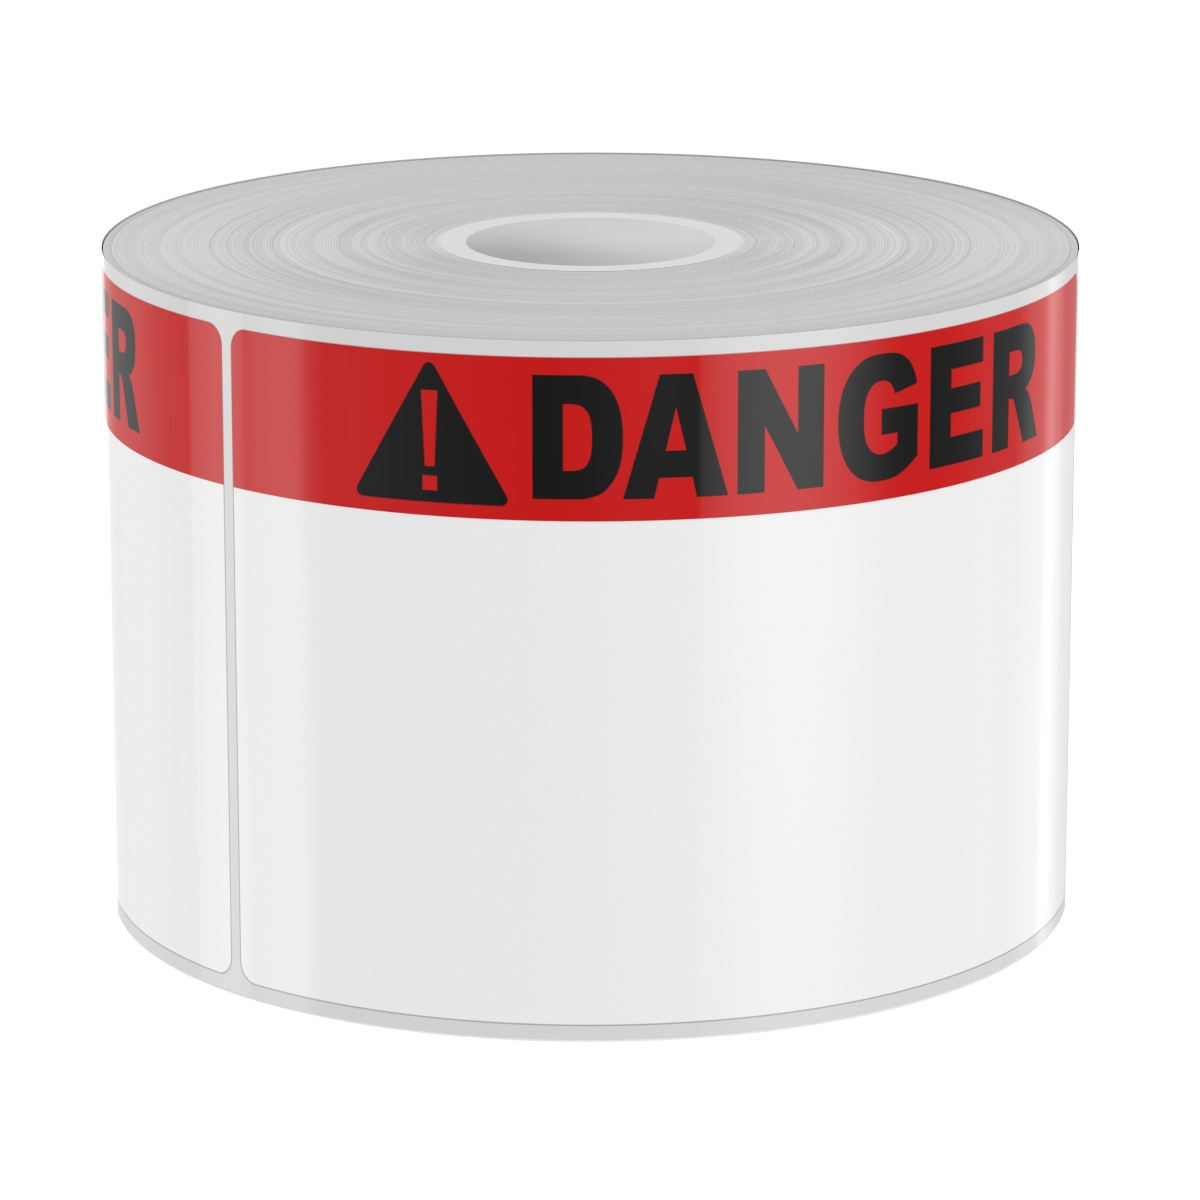 Detail view for 250 3" x 5" High-Performance Red Band with Black Danger